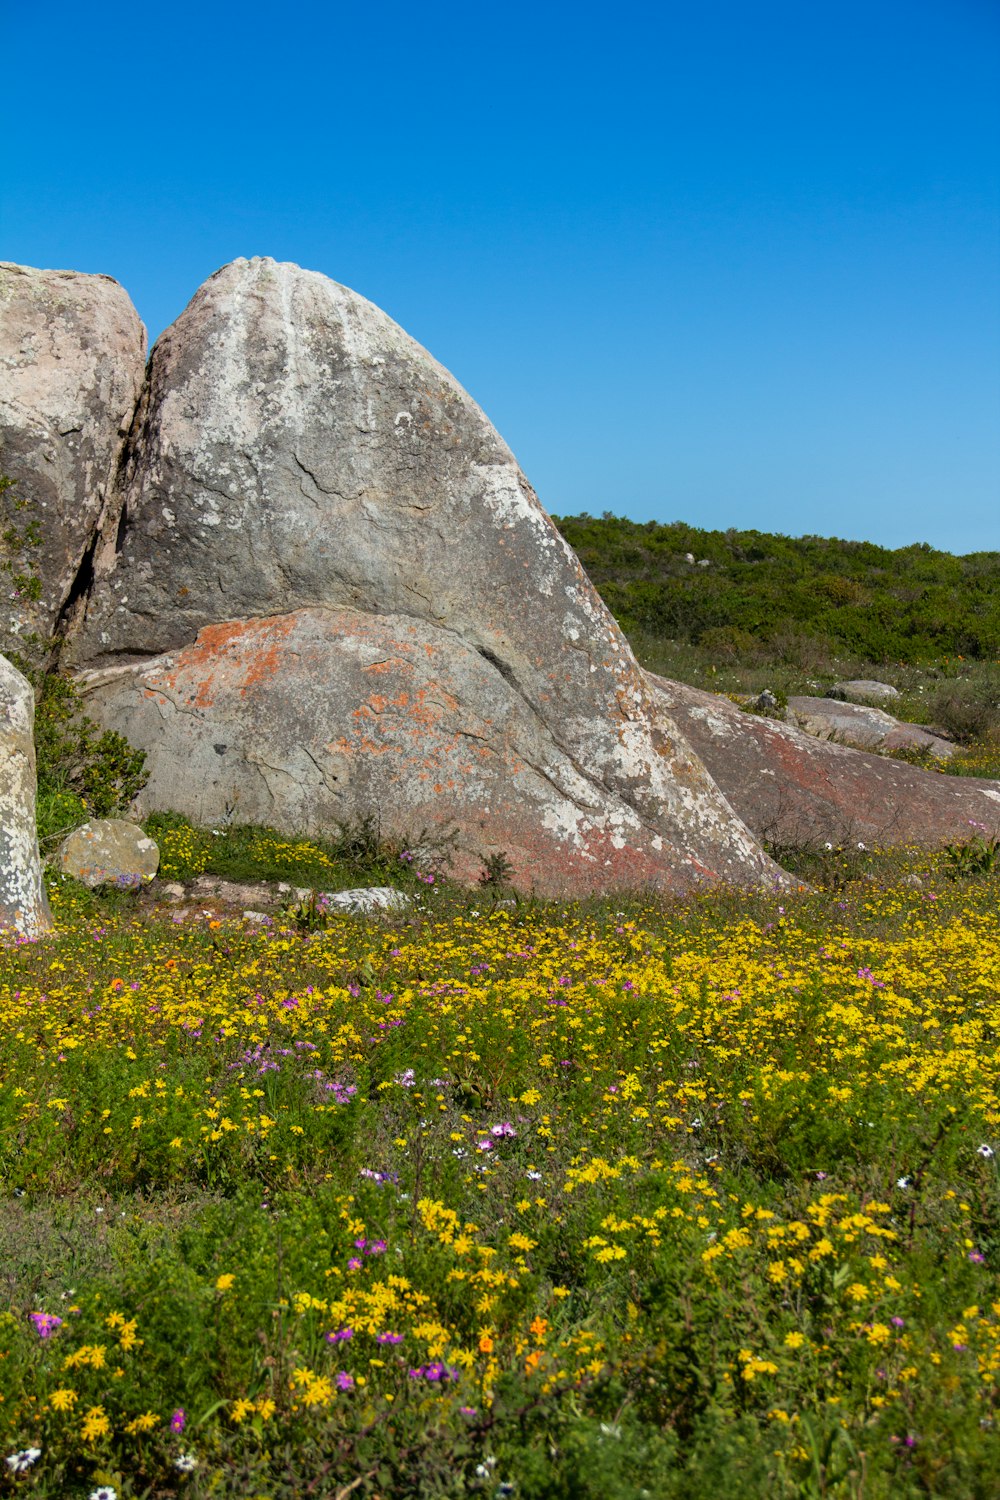 yellow flower field near gray rock formation under blue sky during daytime